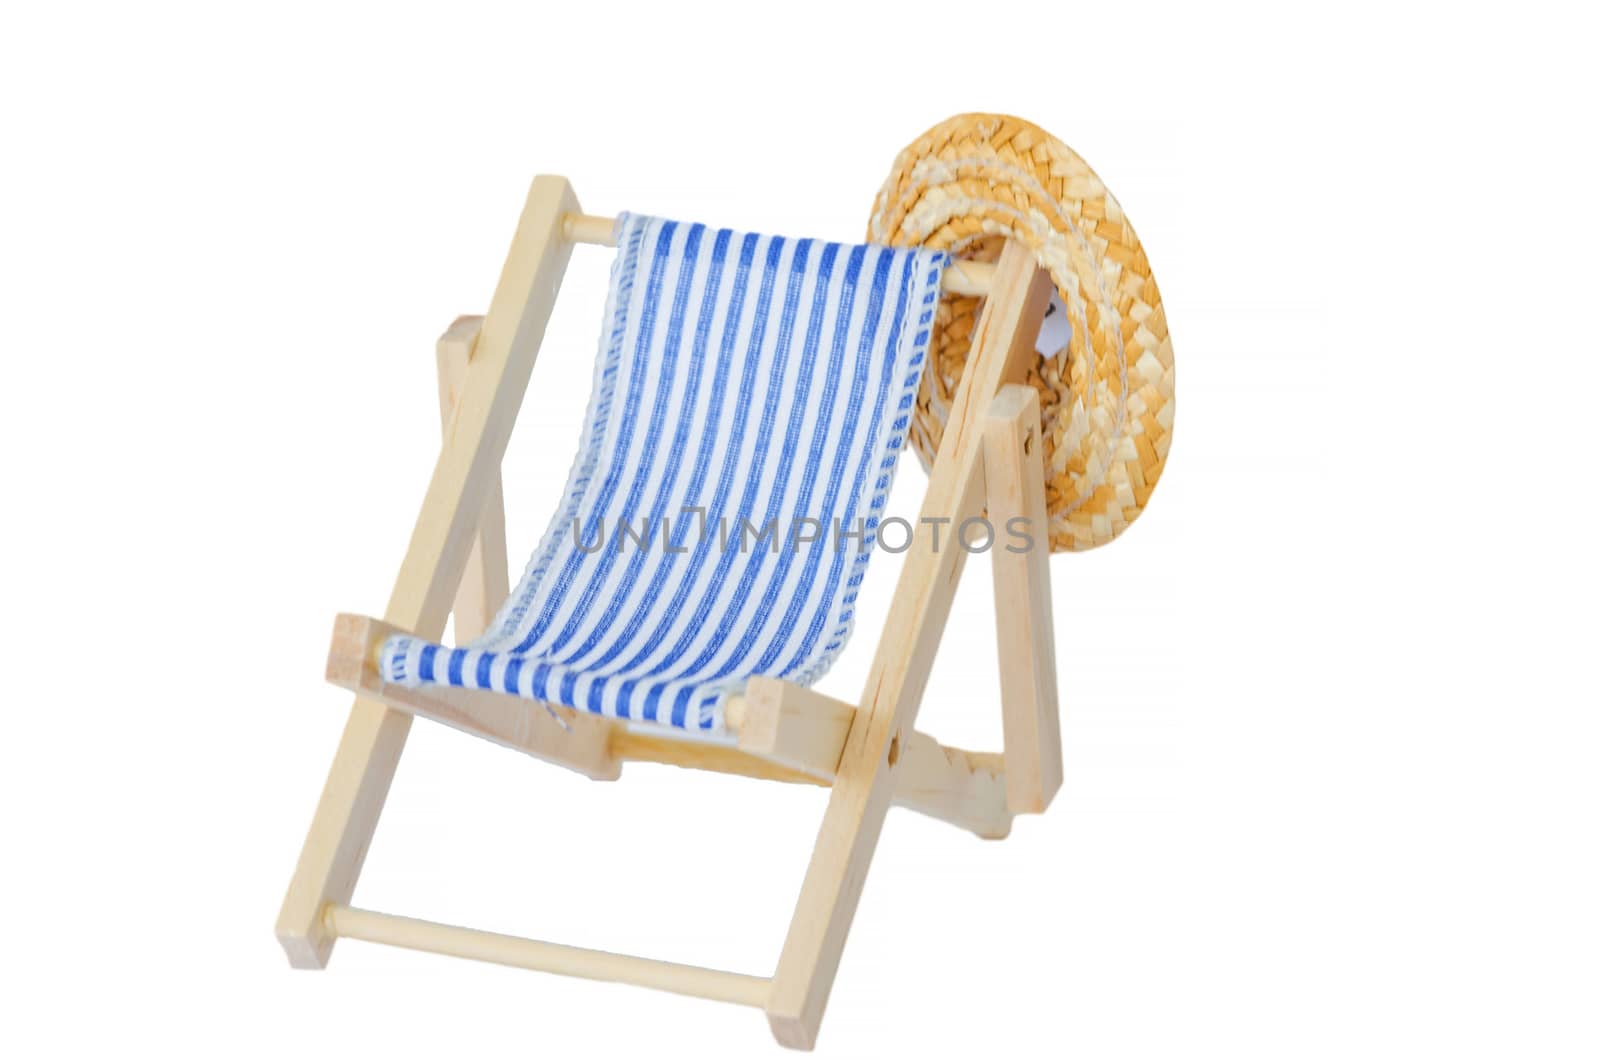 Wooden deck chair with sun hat by JFsPic